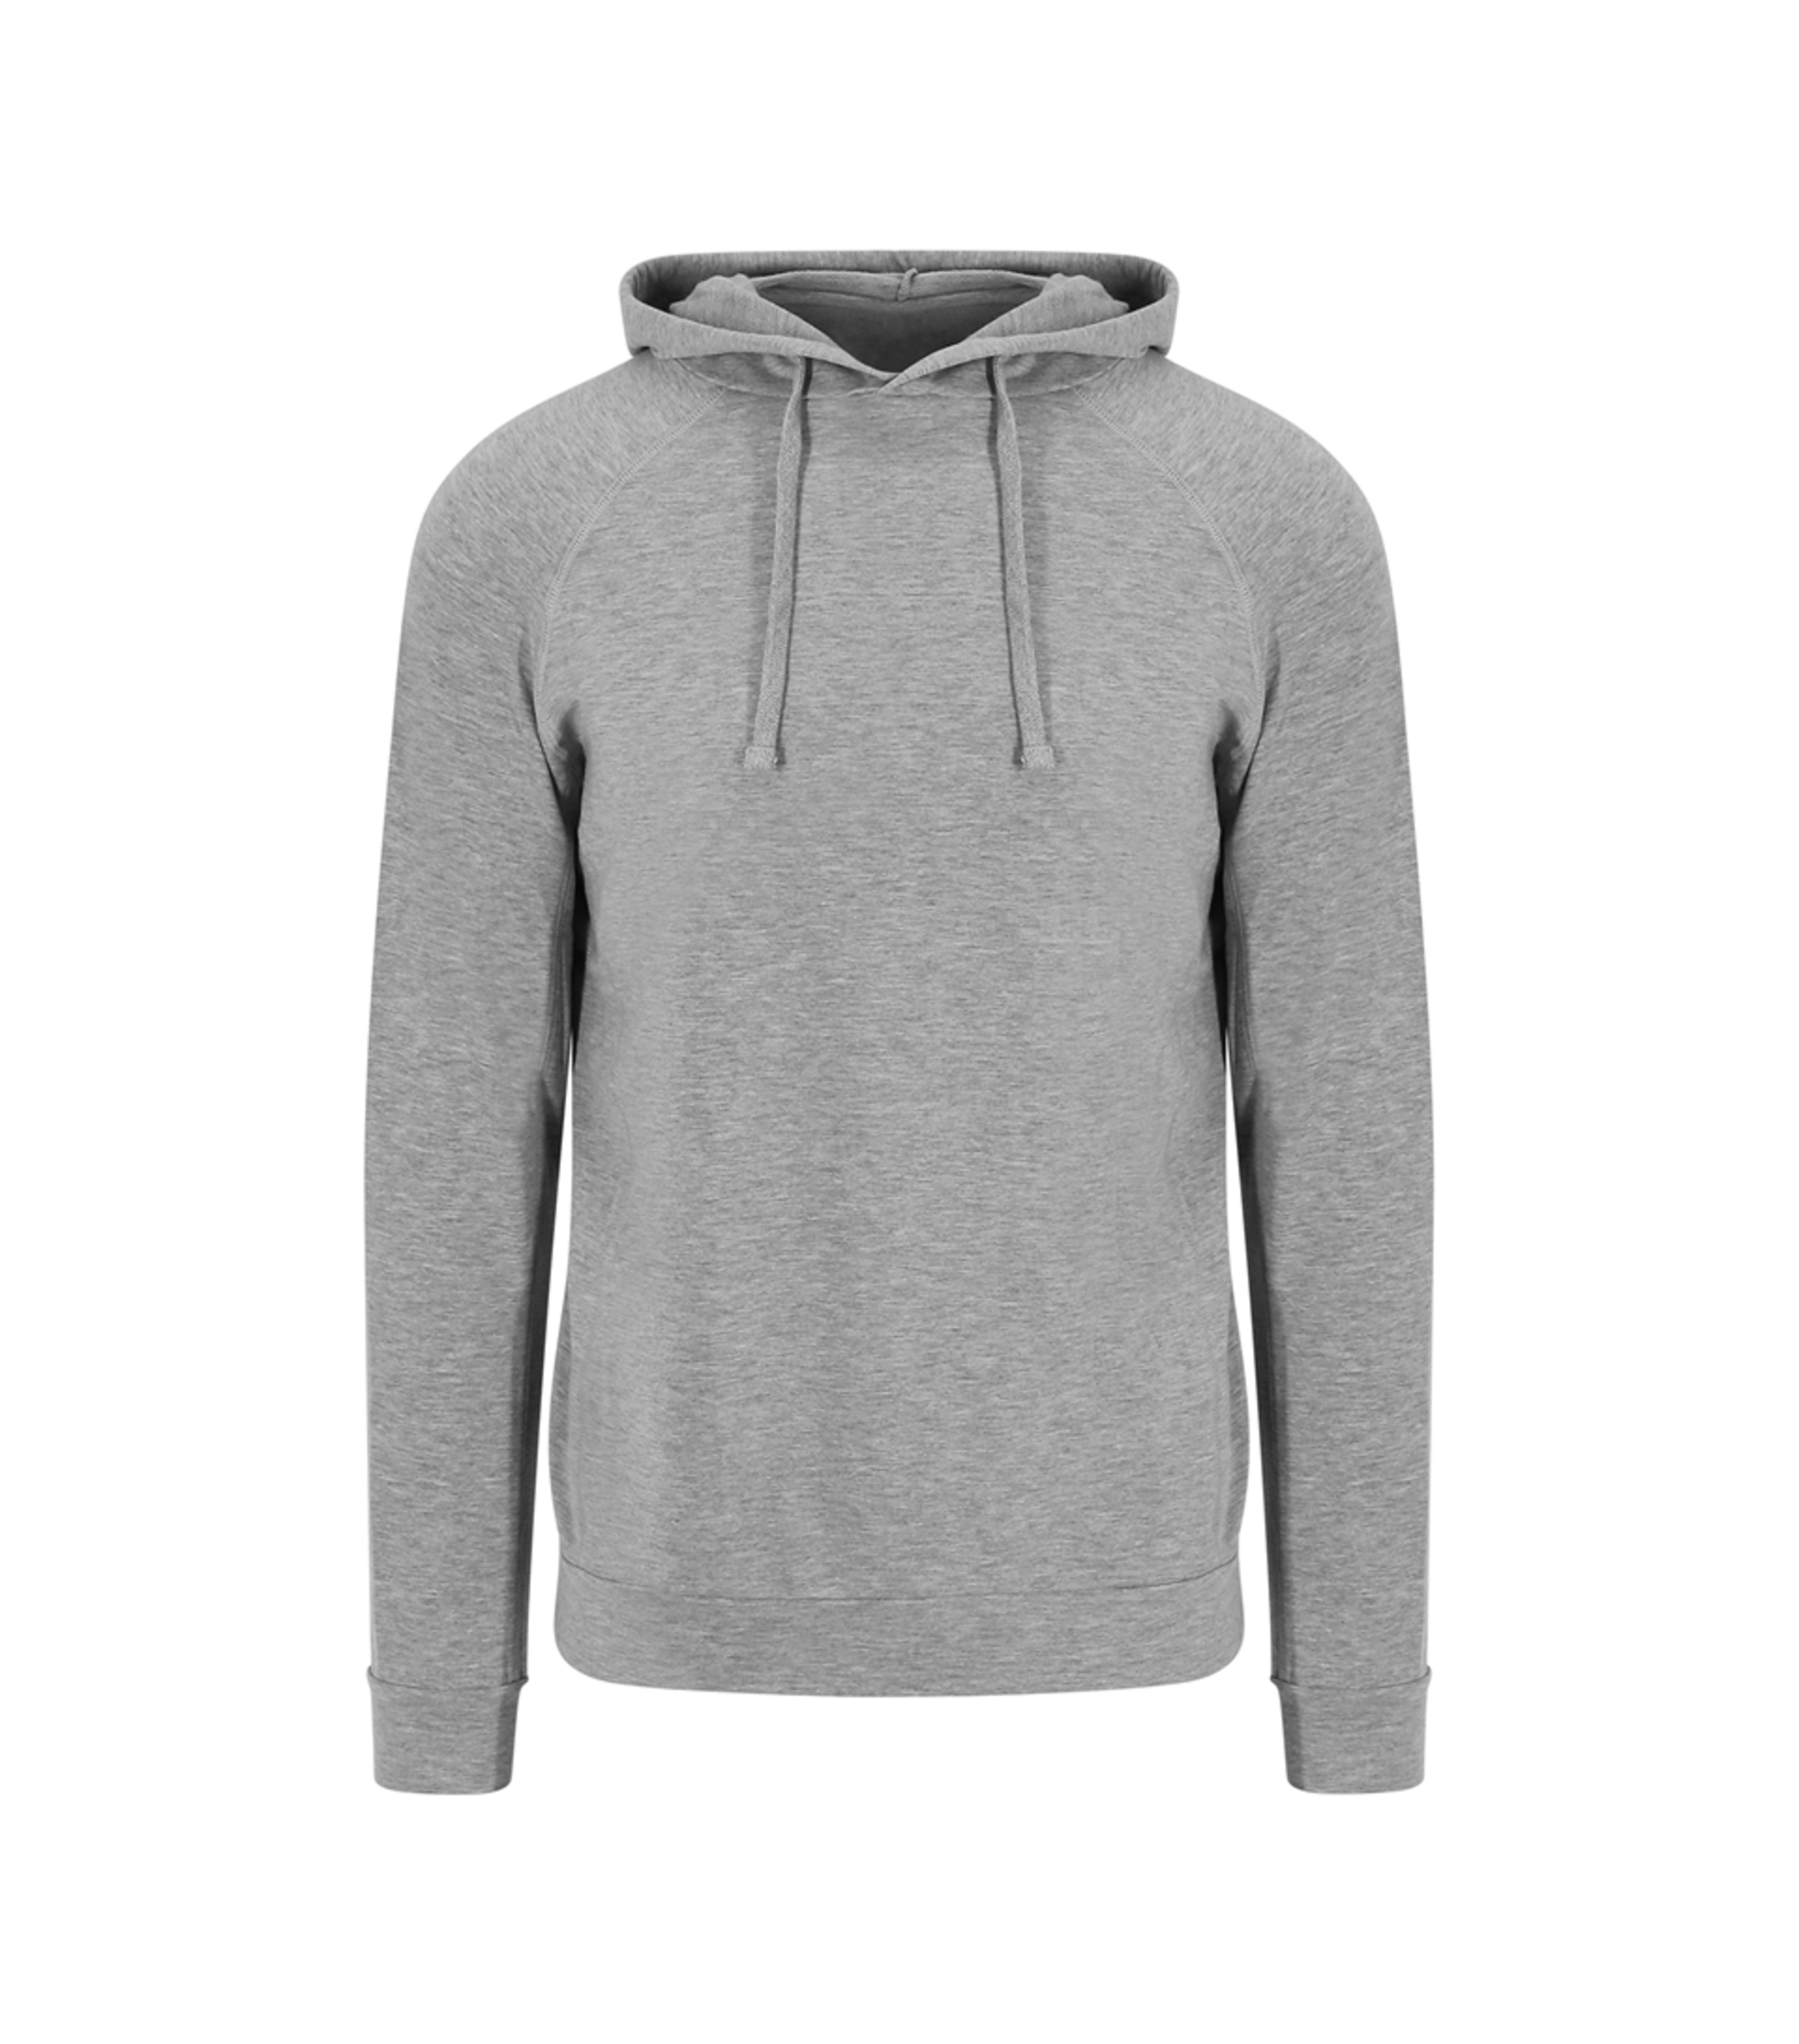 Just Cool Cool Fitness Hoodie - Sports Grey - S